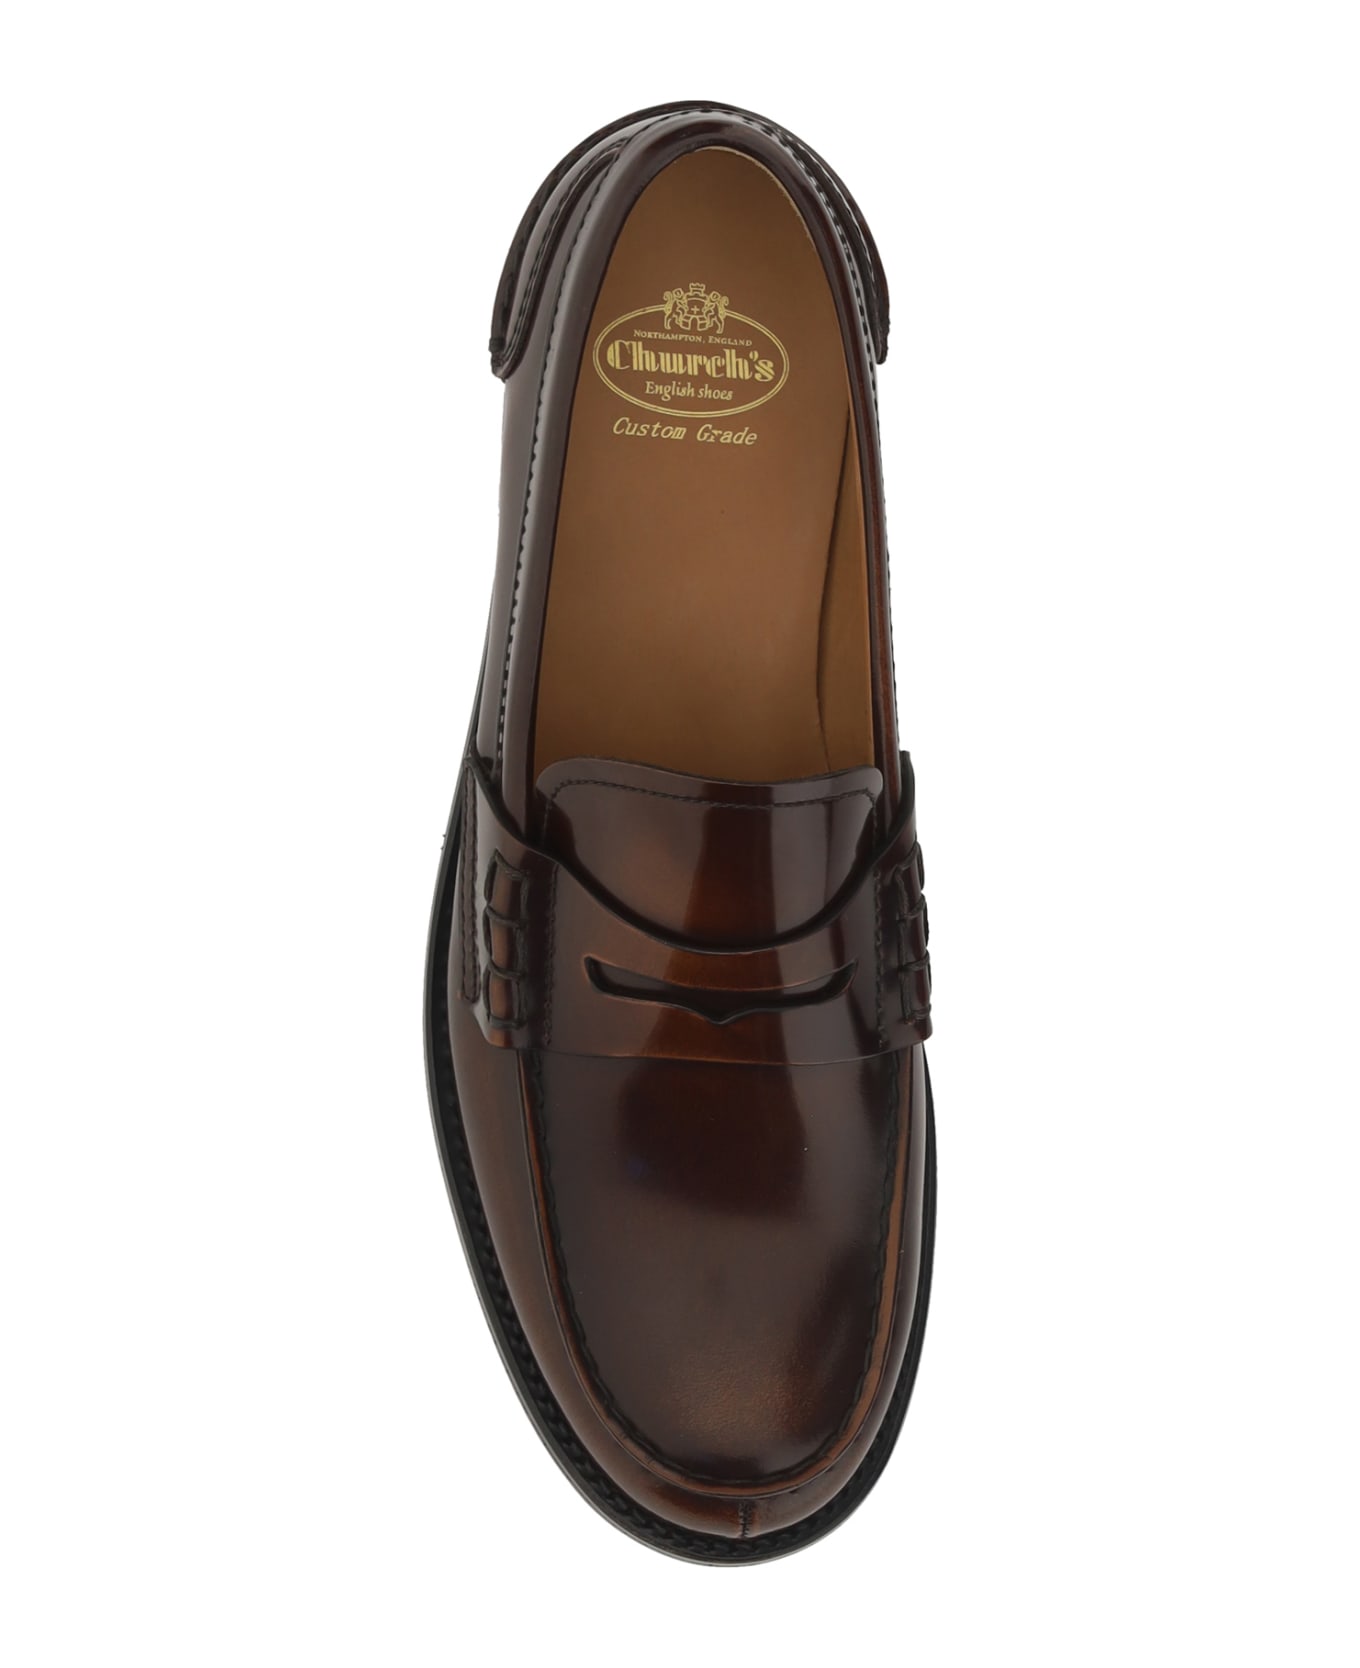 Church's Pembrey Loafers - Tabac